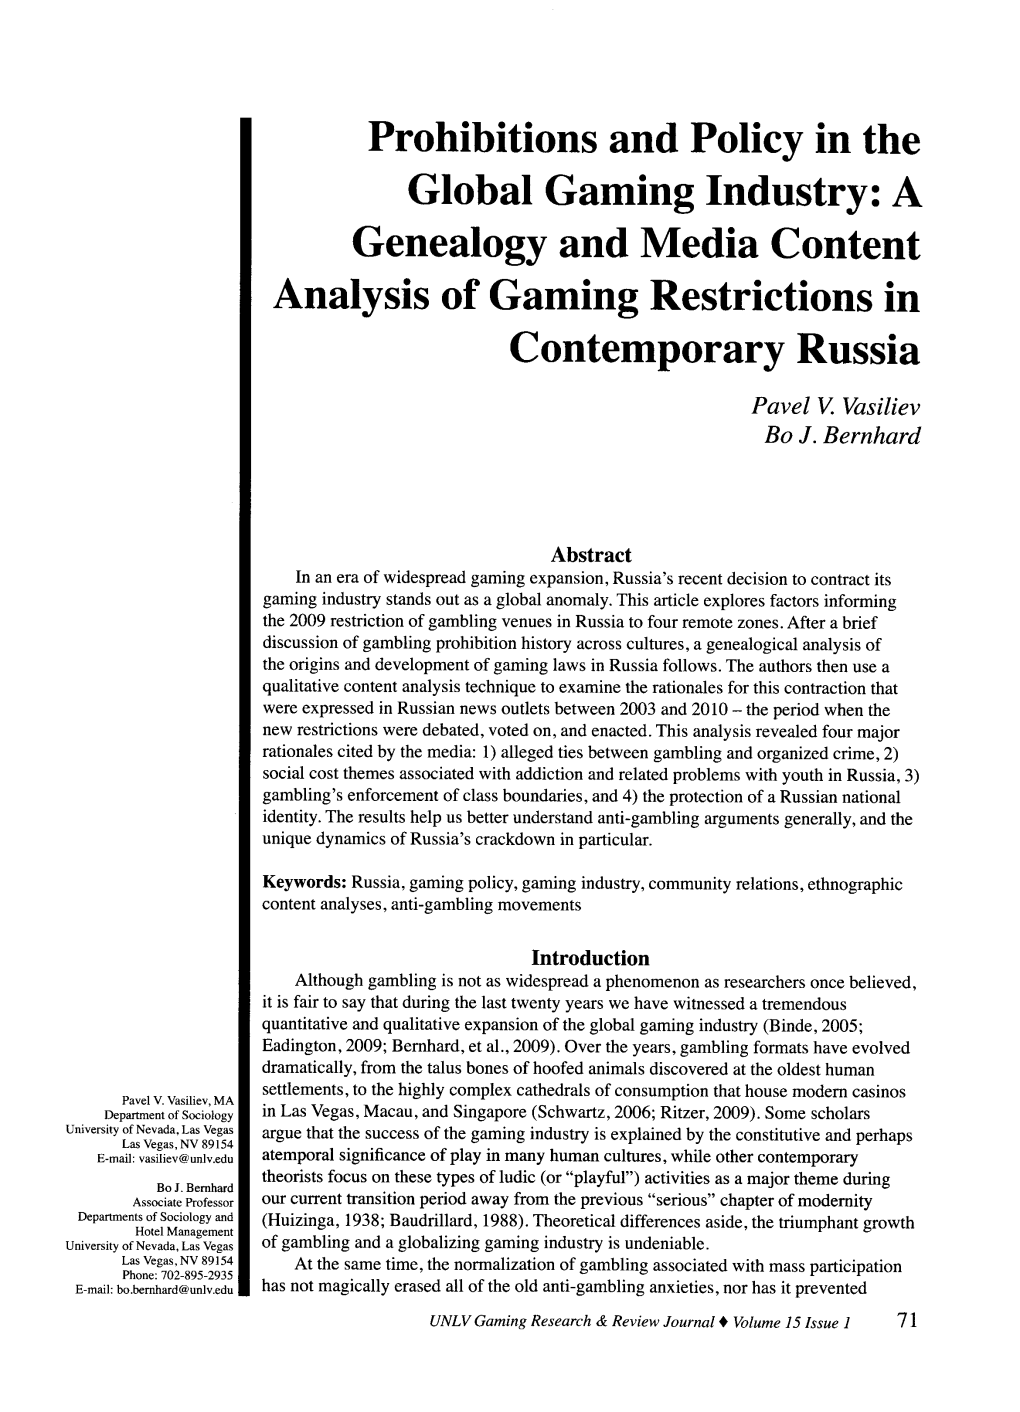 Prohibitions and Policy in the Global Gaming Industry: a Genealogy and Media Content Analysis of Gaming Restrictions in Contemporary Russia Pavel V